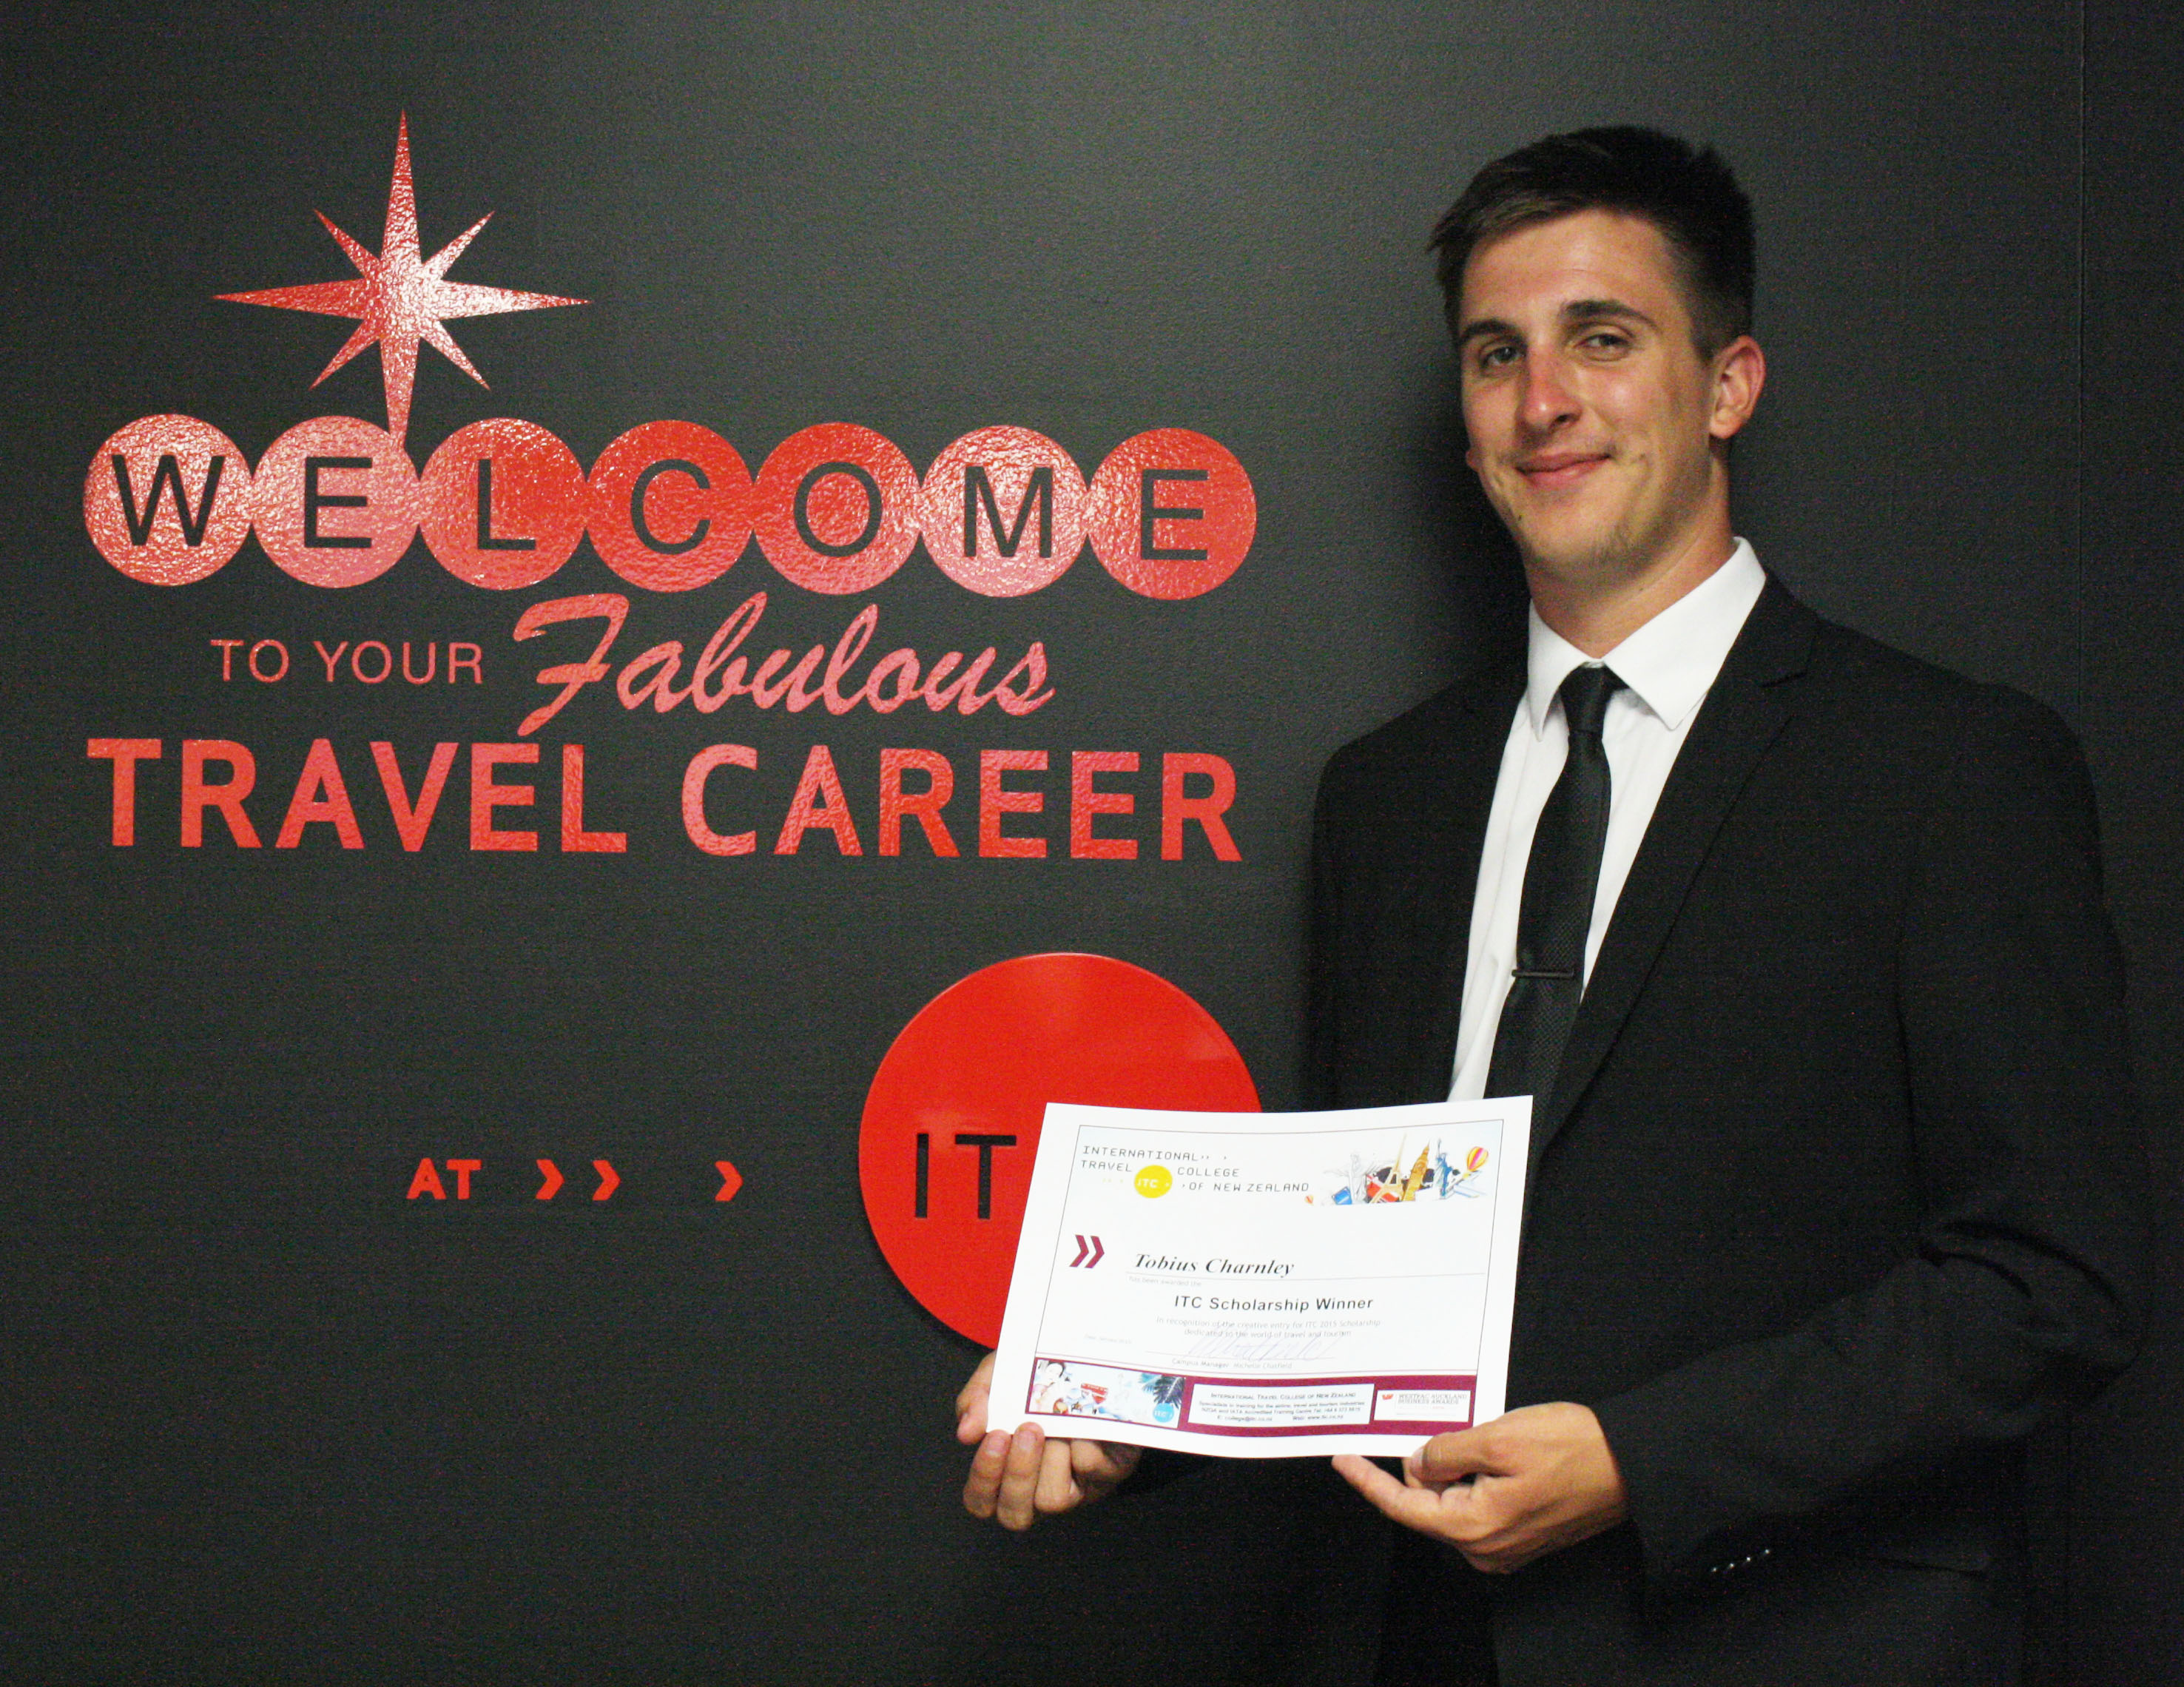 Tobius Charnley comes to ITC with some tourism experience already under his belt; he worked part-time at a hotel while at high school